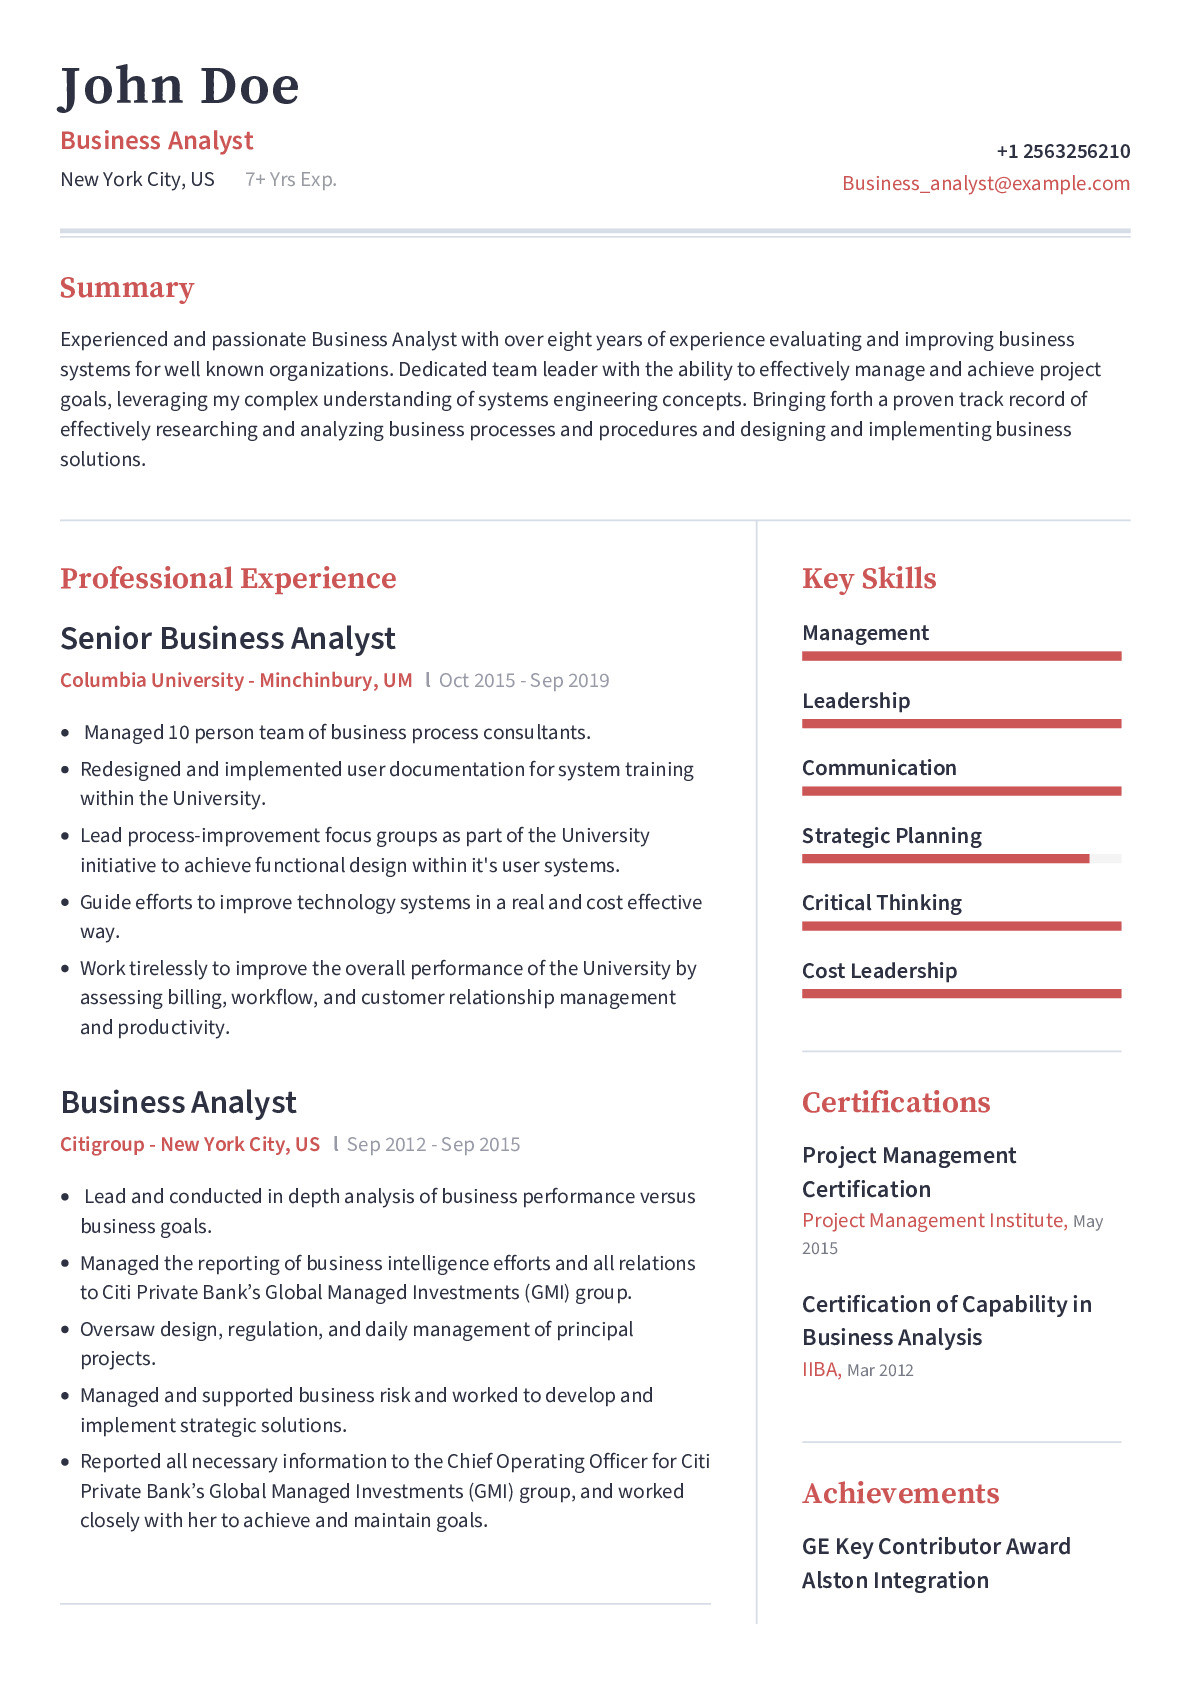 Real Sample Resumes Of Business Analyst Business Analyst Resume Example with Pre-written Content Sample …